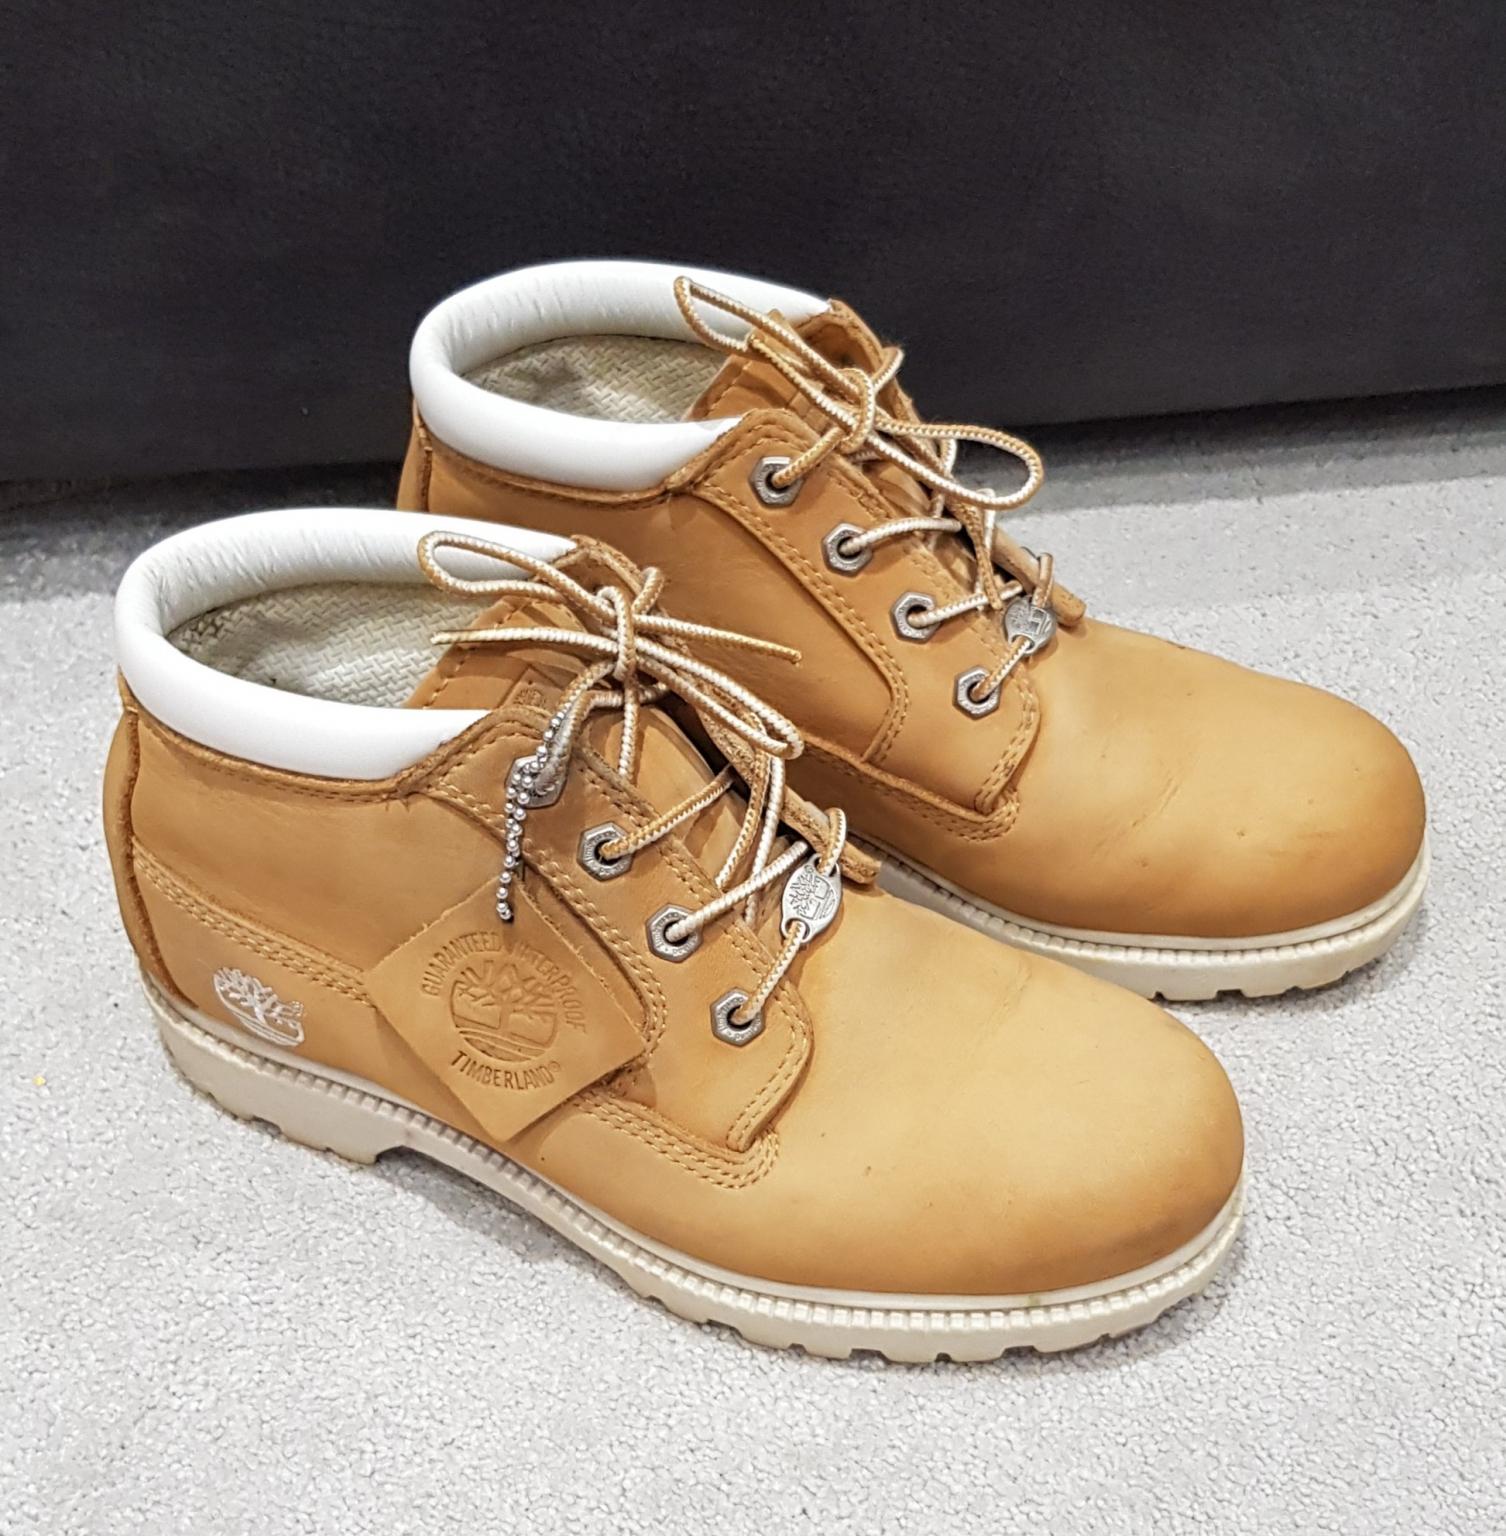 Timberland Boots size uk 5.5 in SS16 